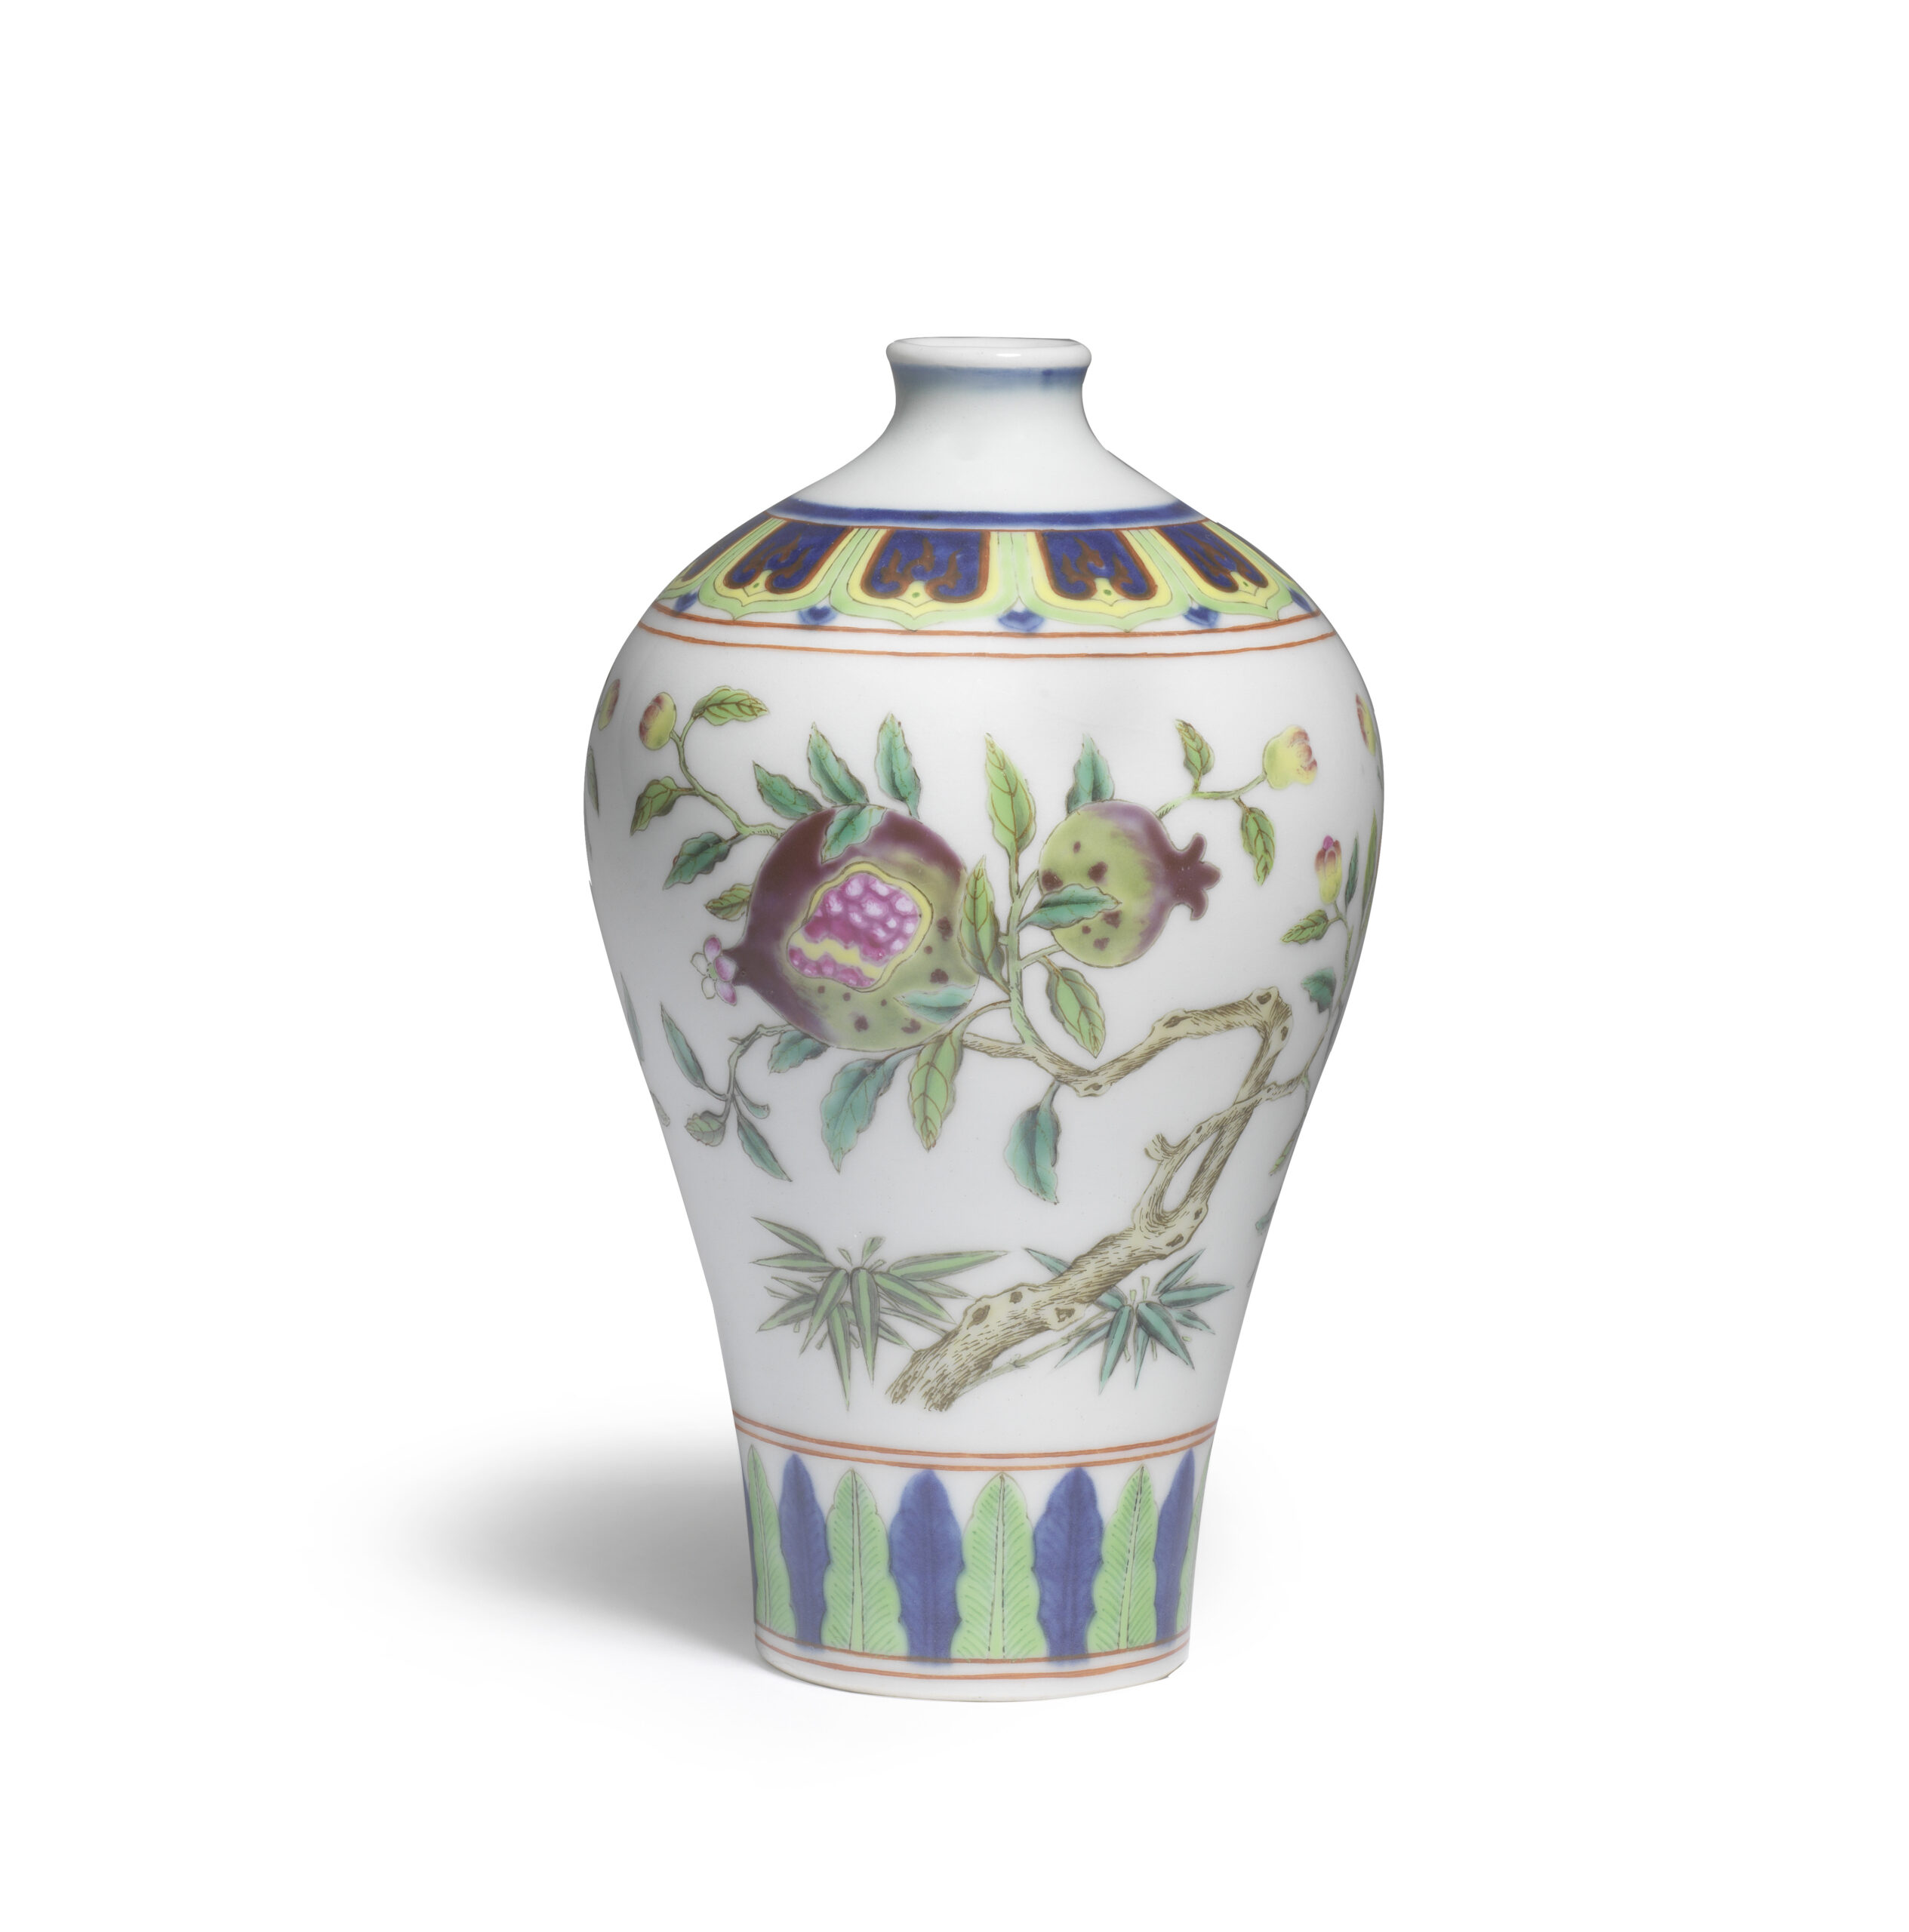 An exceptionally rare Imperial famille rose and underglaze blue pomegranate vase, Qianlong seal mark and of the period